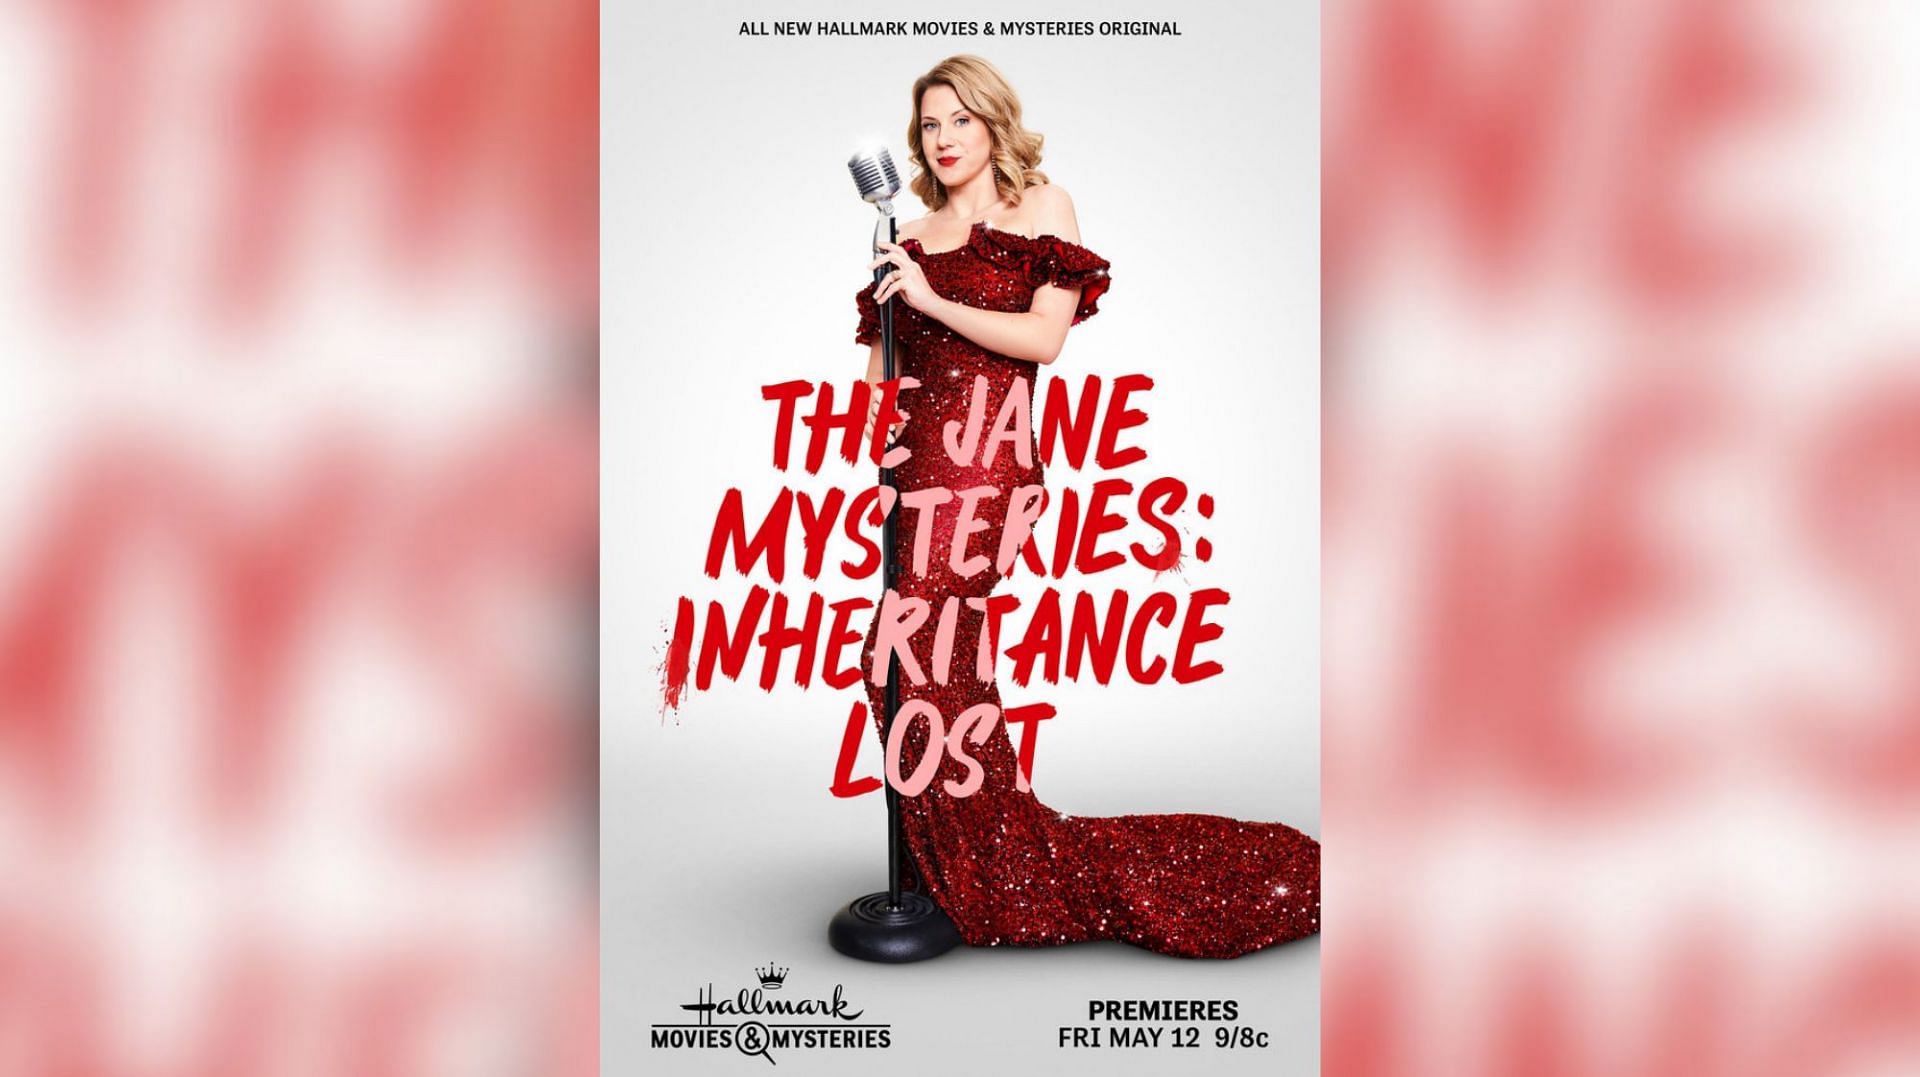 4 Hallmark Movies & Mysteries (HMM) releases of May and June 2023